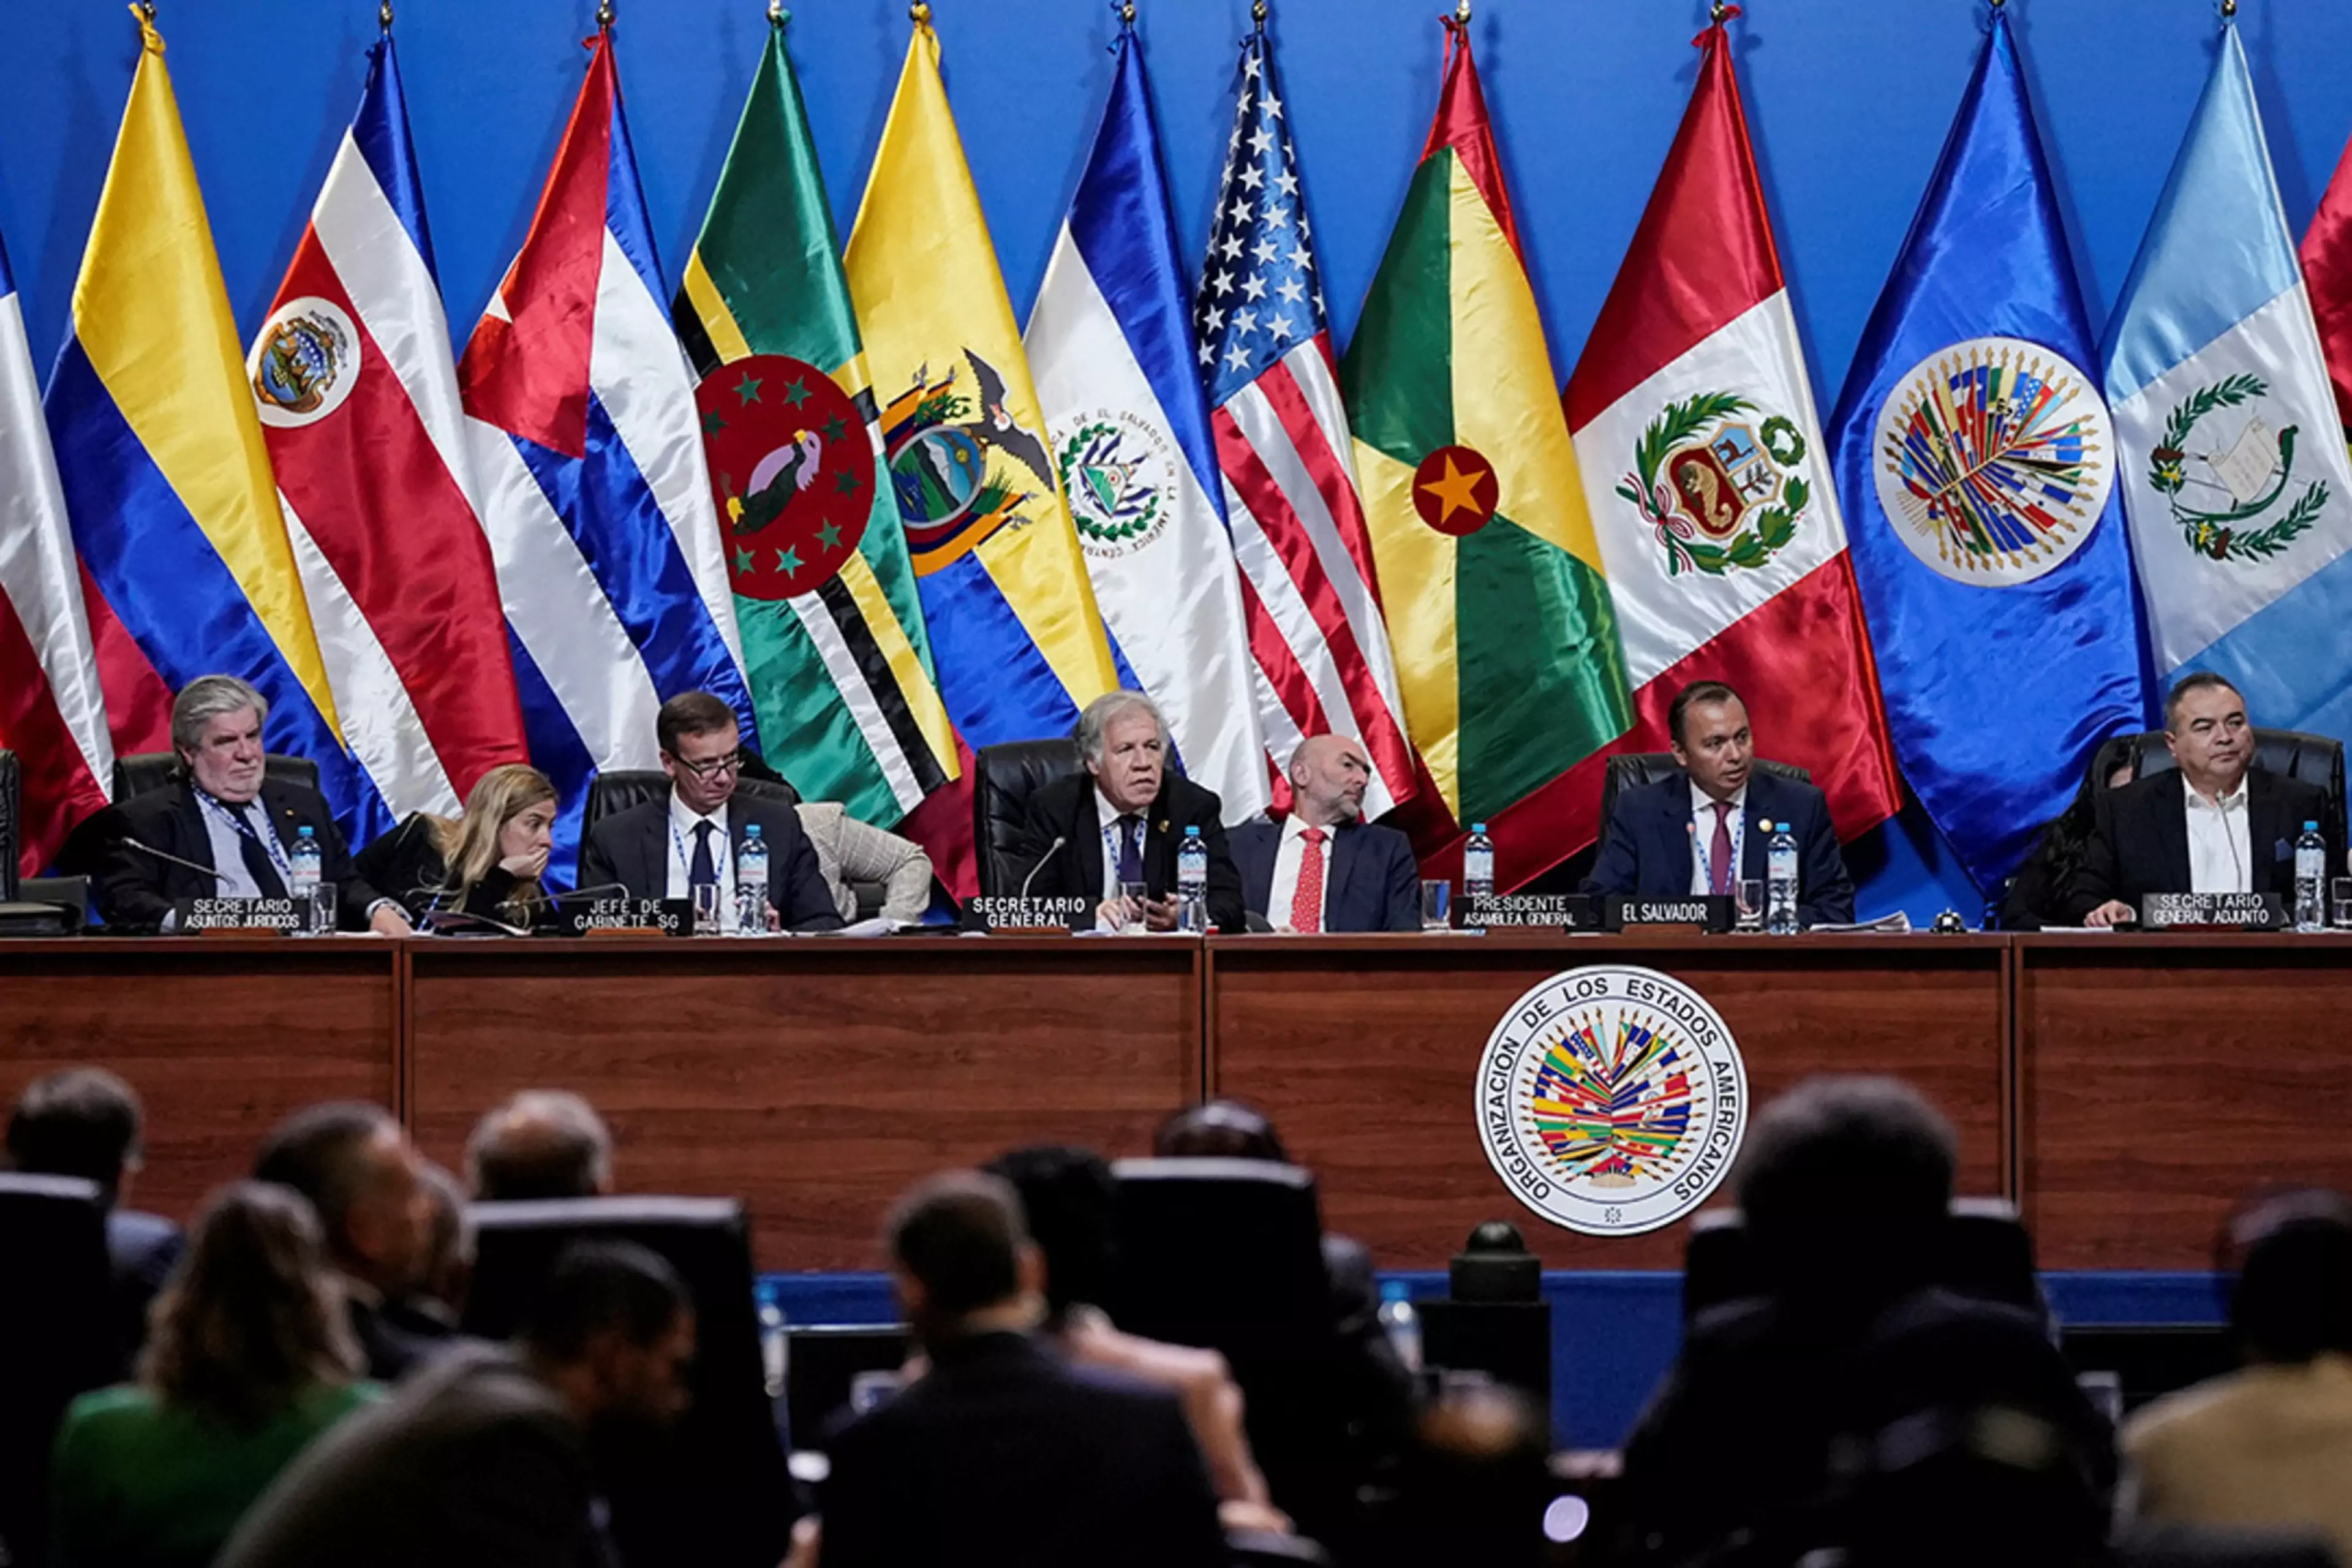 Secretary-General Luis Almagro convenes the OAS’s fifty-second General Assembly in Lima, Peru.